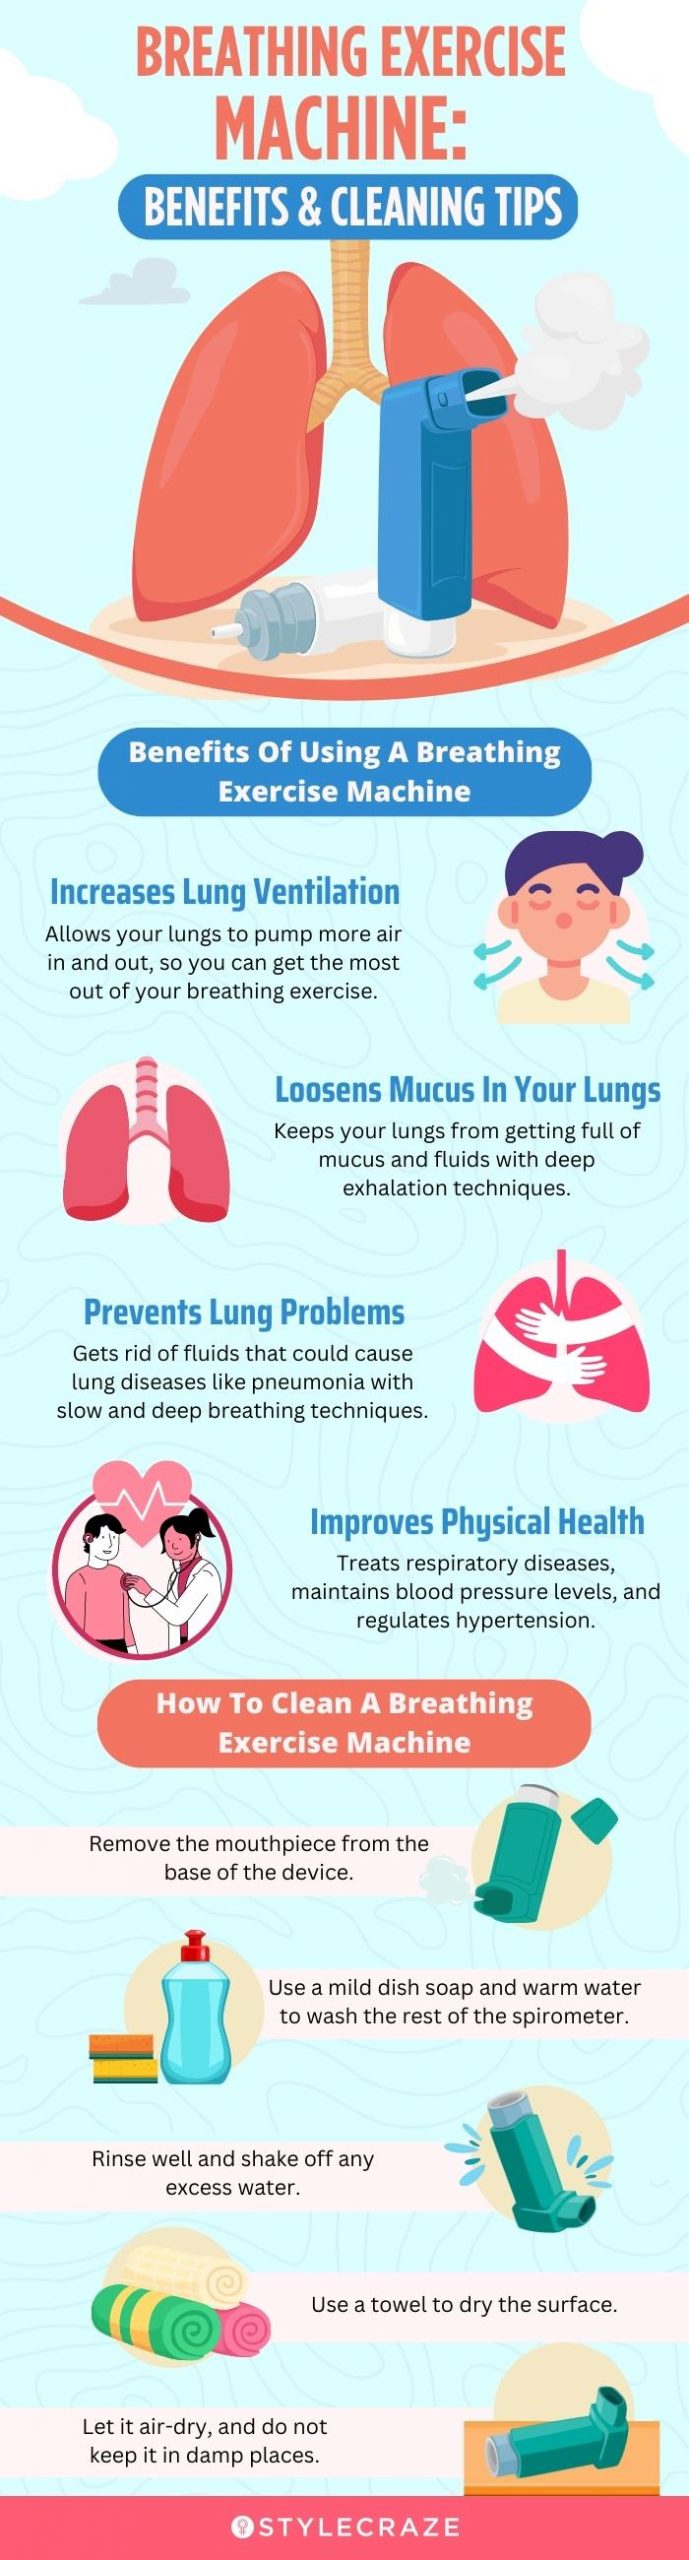 Breathing Exercise Machine: Benefits & Cleaning Tips (infographic)